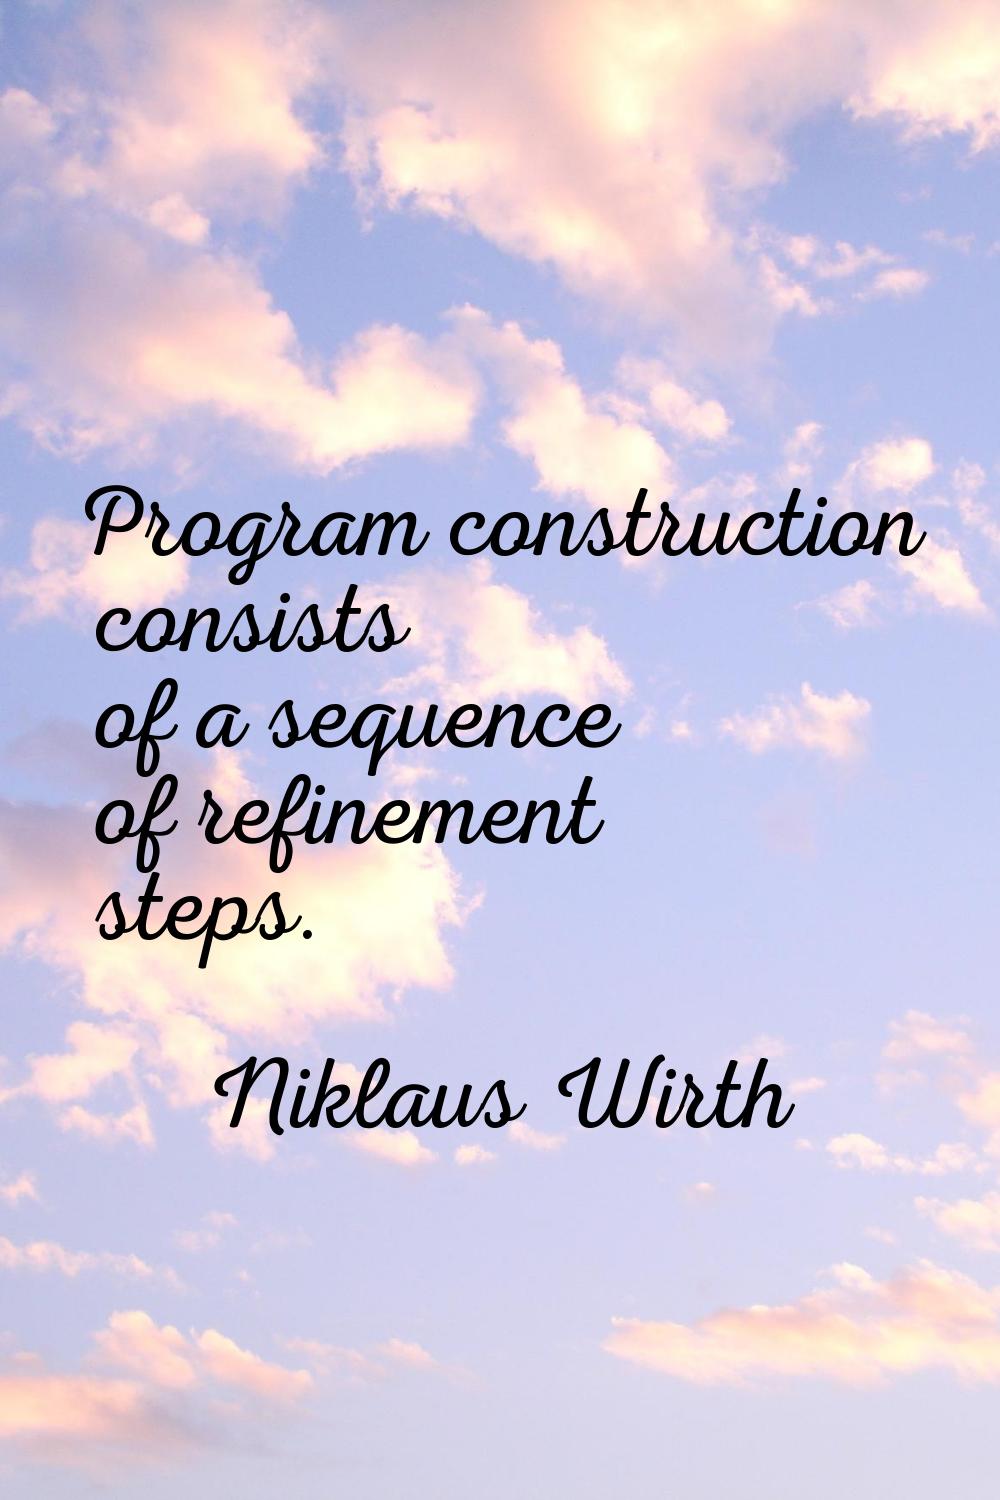 Program construction consists of a sequence of refinement steps.